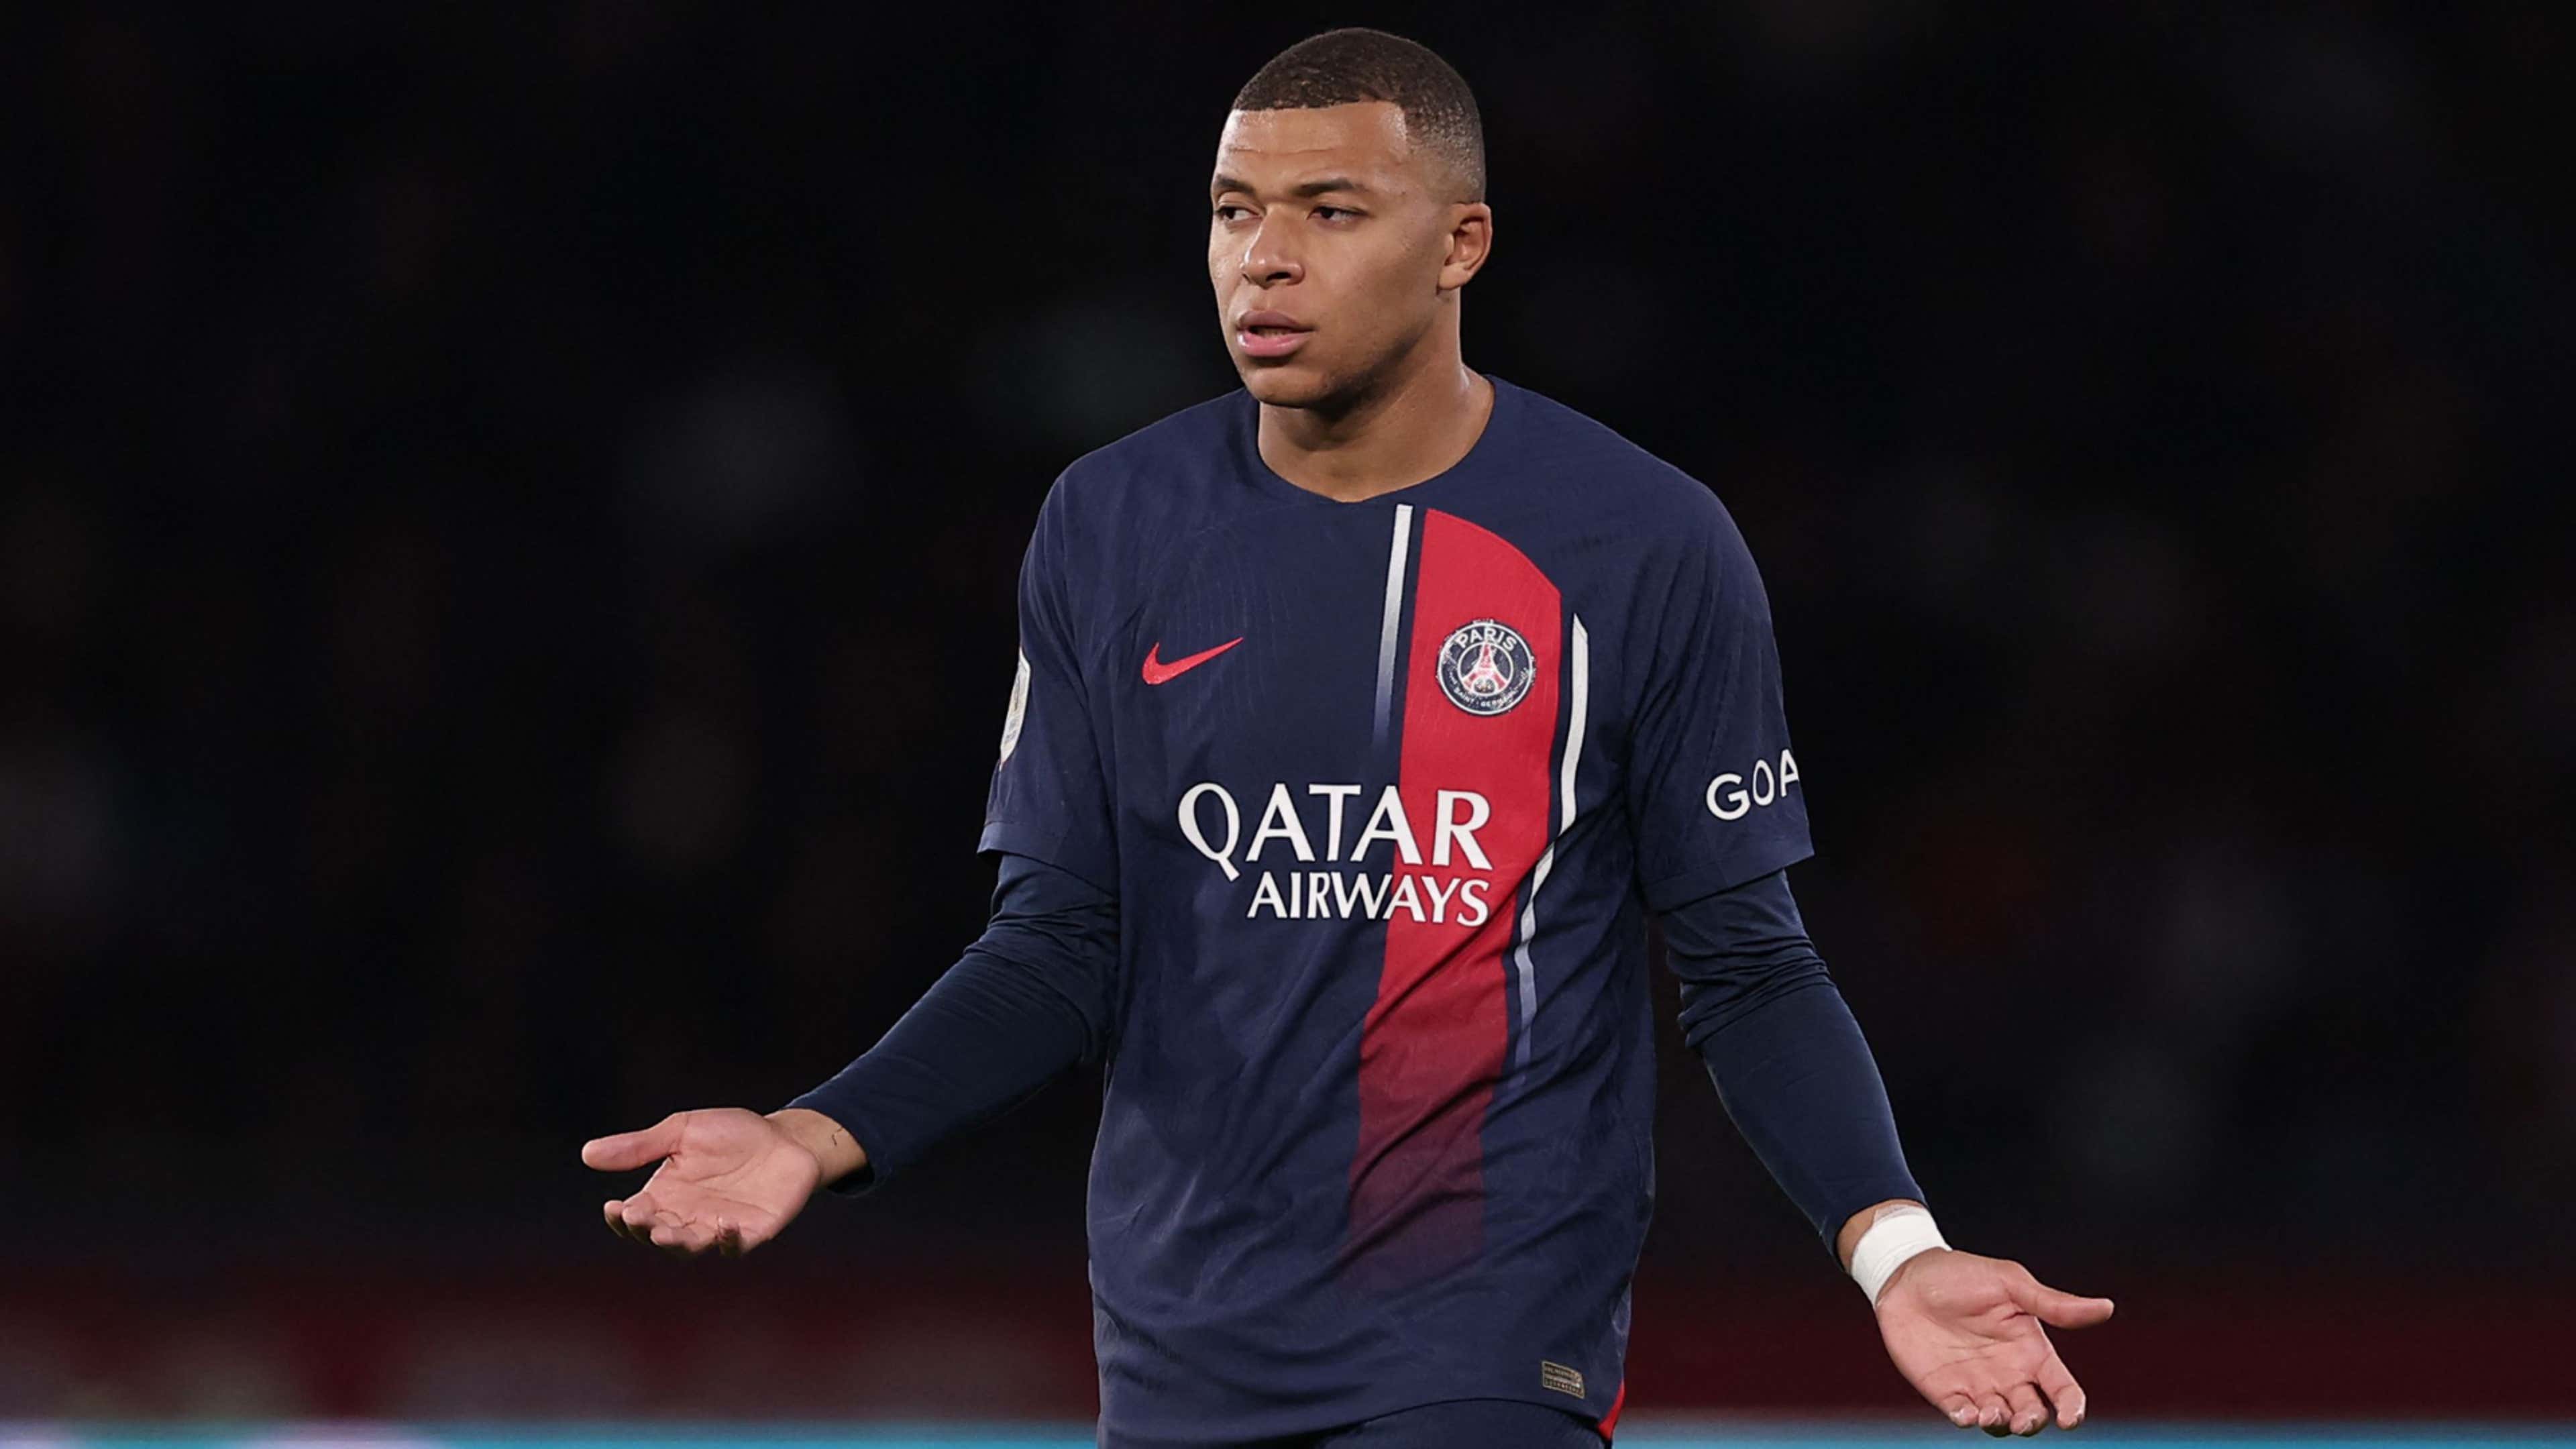 PSG manager Luis Enrique breaks silence on Kylian Mbappe contract situation amid Liverpool and Real Madrid links.